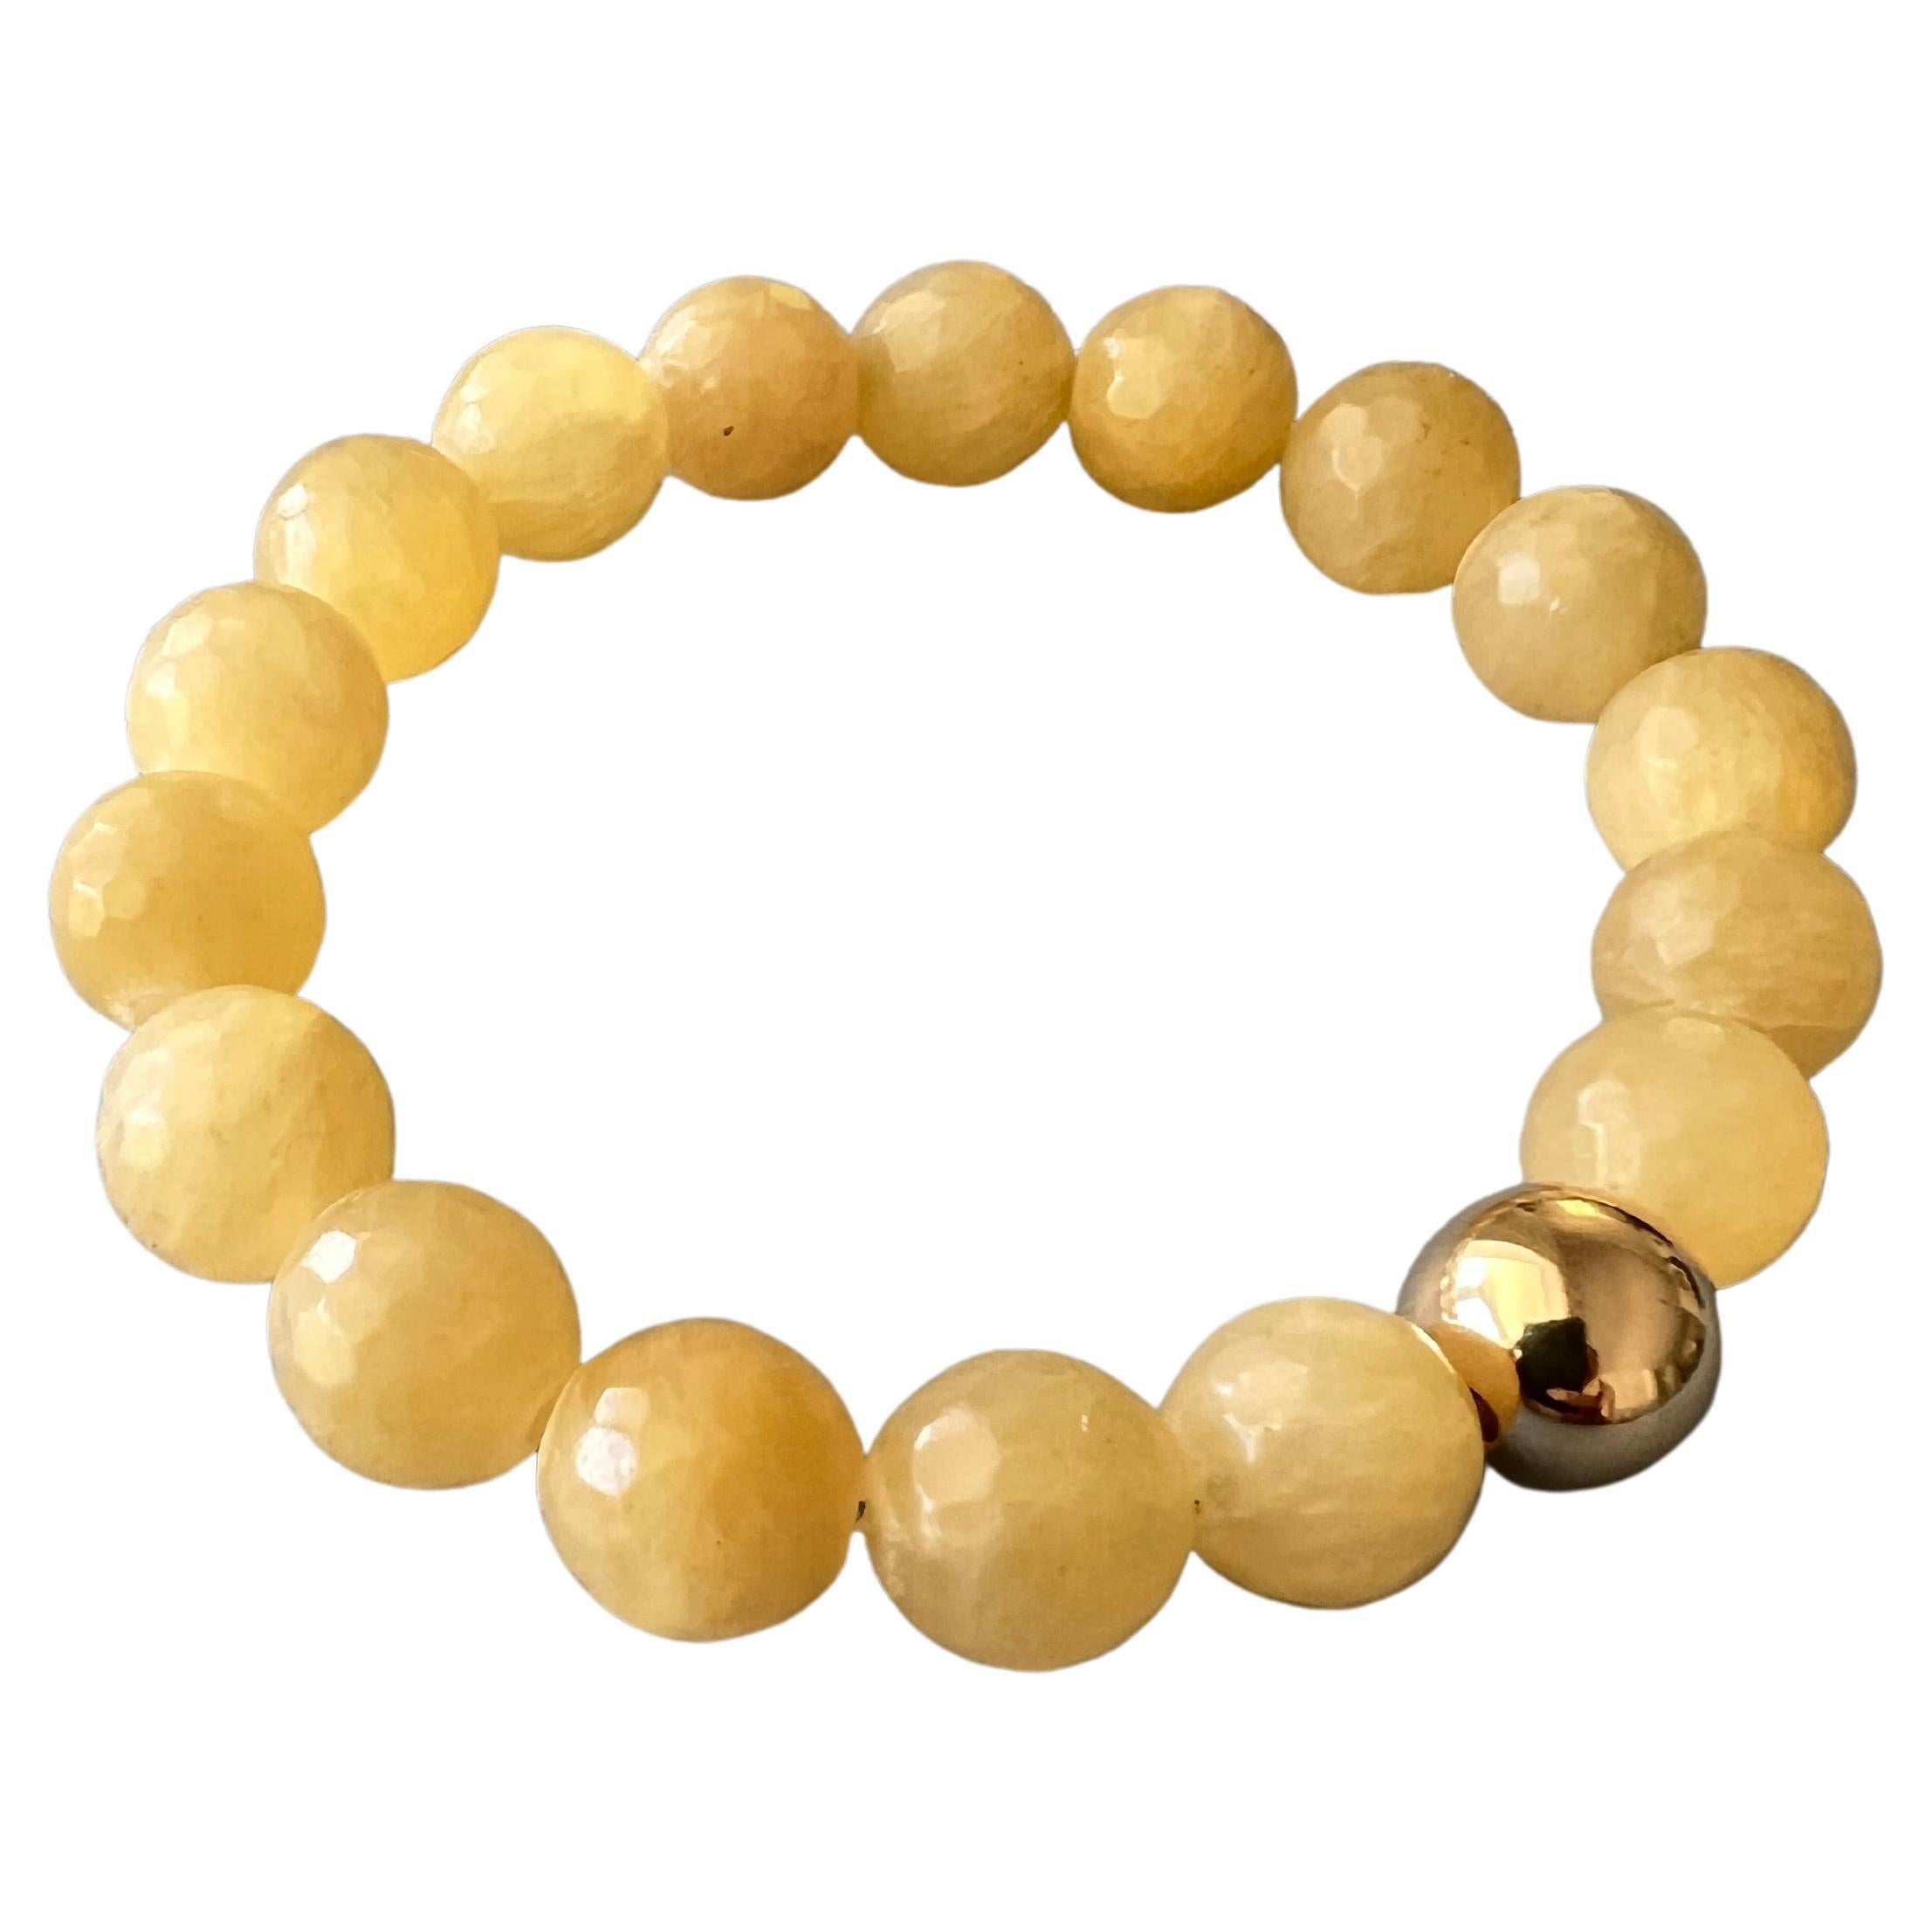 Yellow Calcite Round Facteted Bead Bracelet Gold Filled Bead J Dauphin